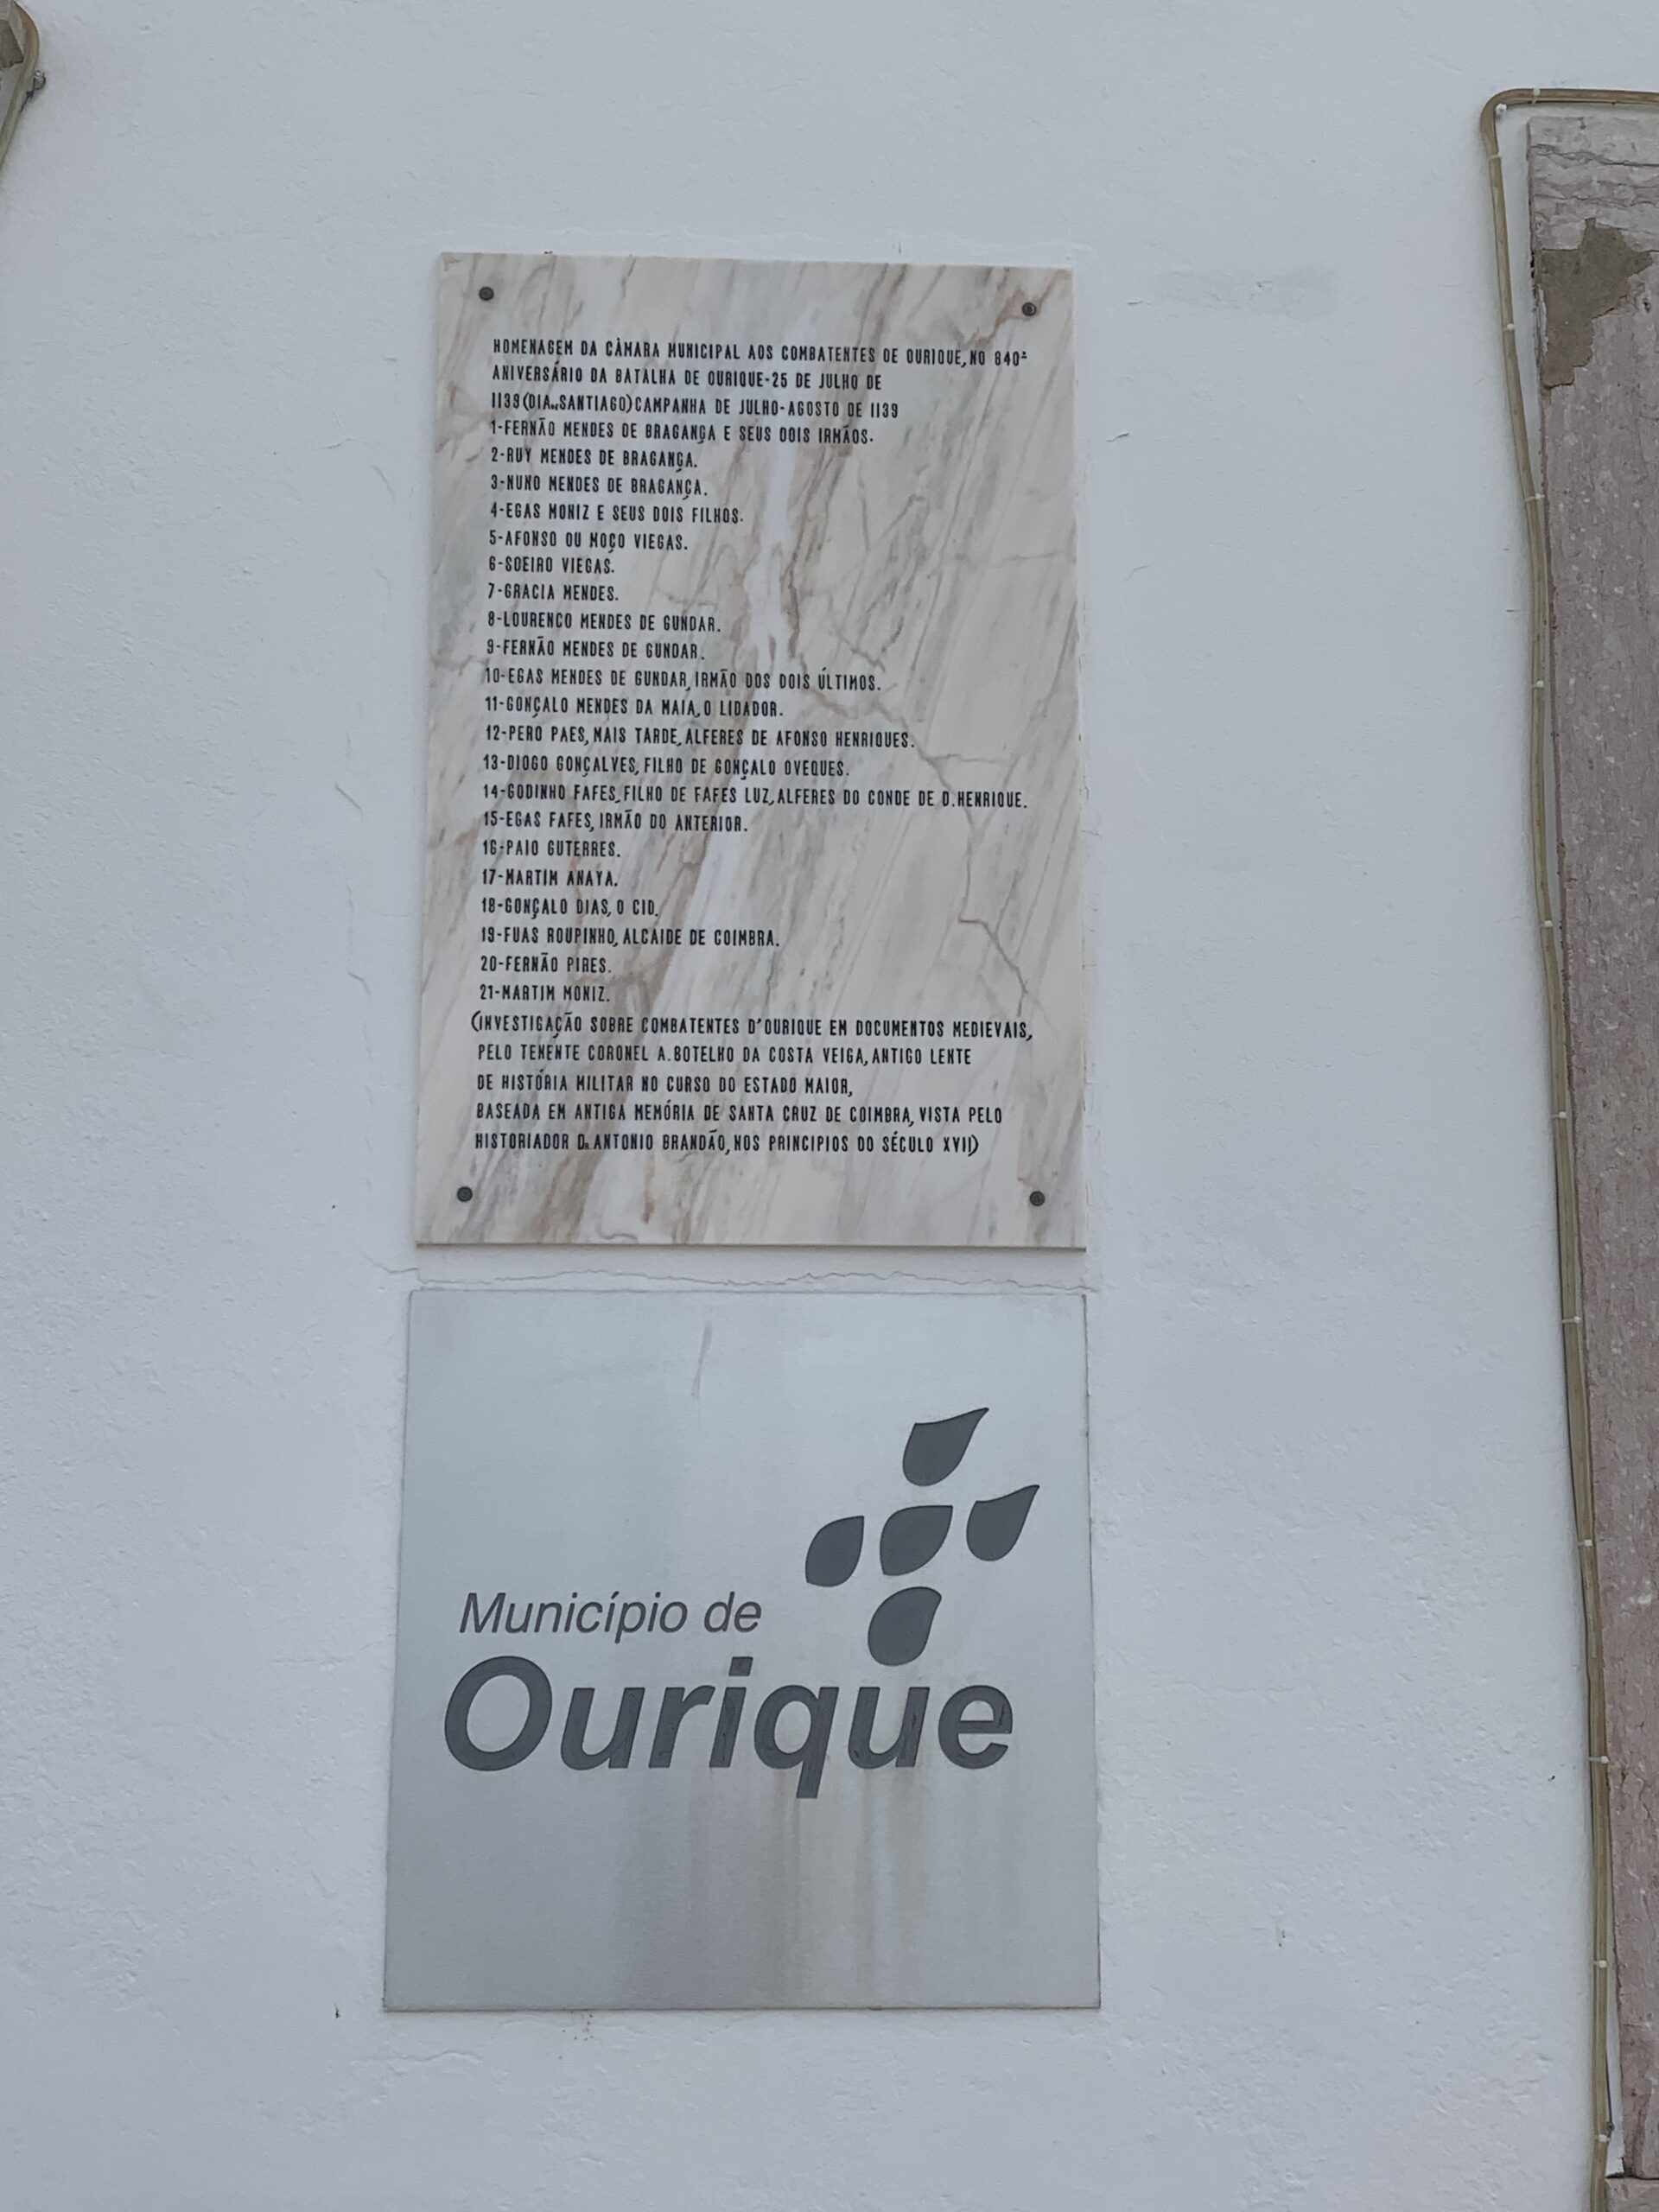 Plaque commemorating the Christian warrior who died in the Battle of Ourique.